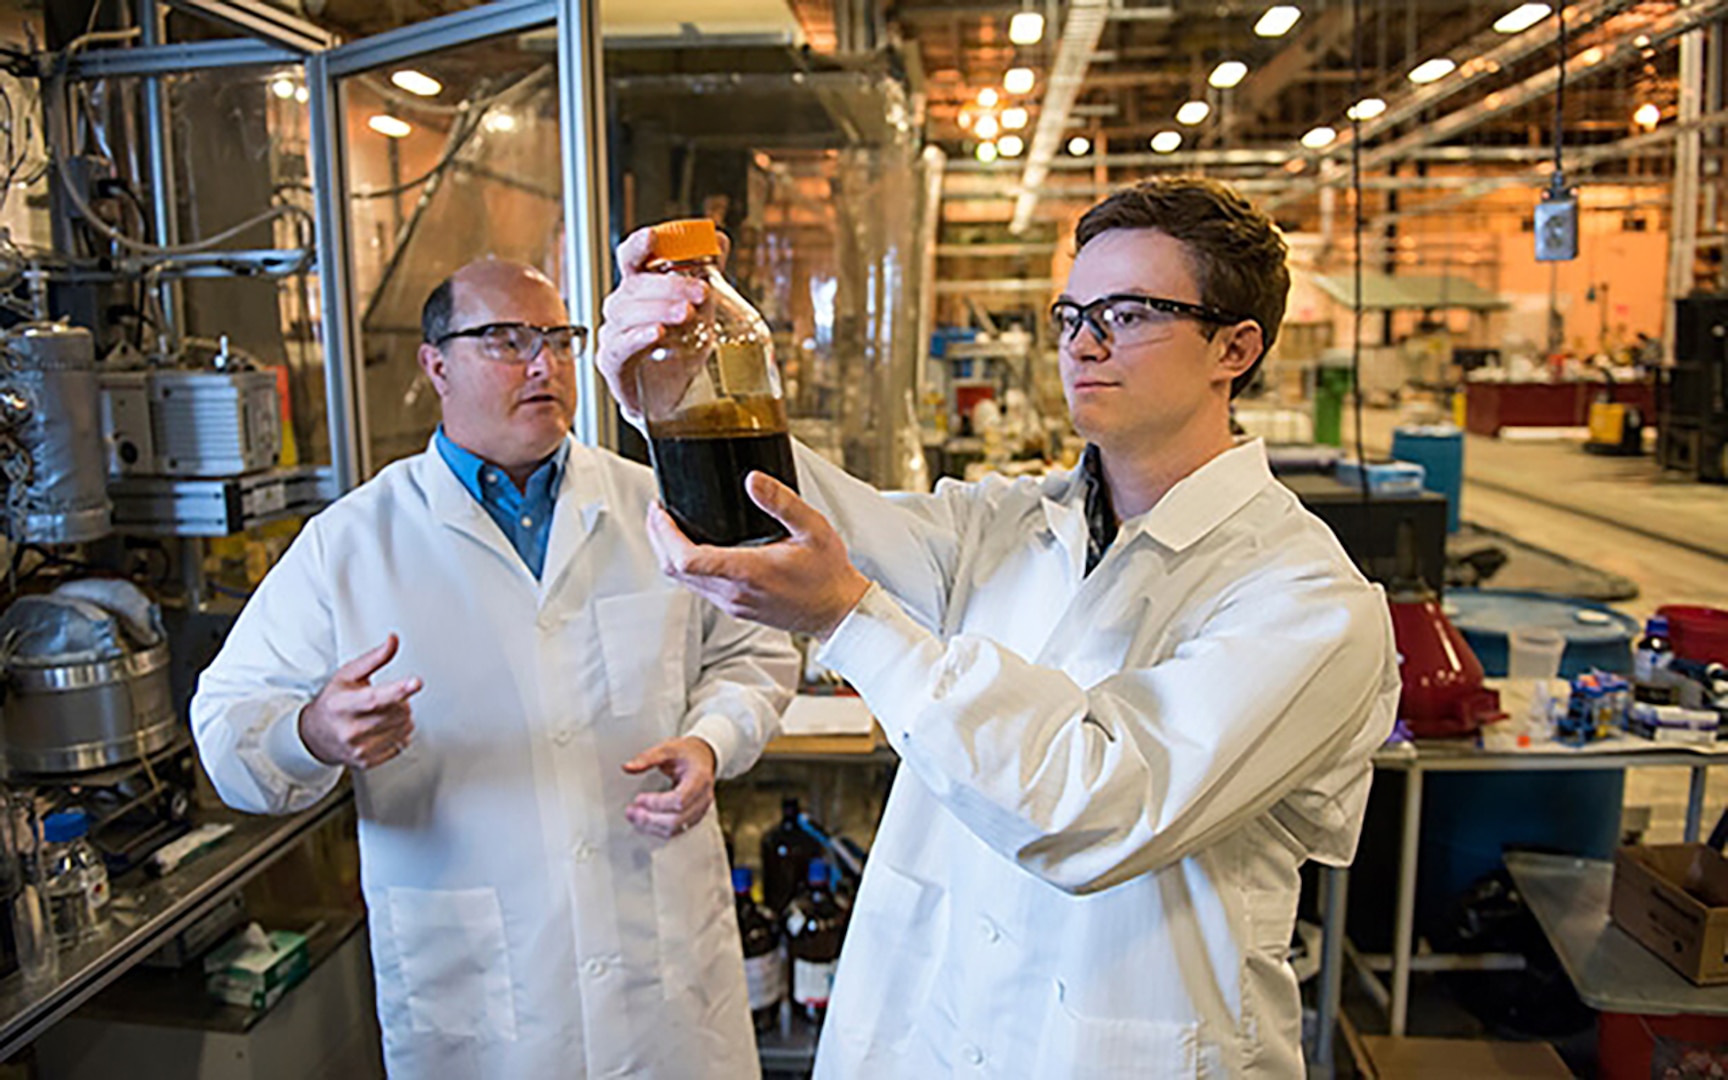 The University of Maine’s Biomass to Bioproducts Pilot Plant at its Technology Research Center is working to convert cellulosic material like recycled paper and cardboard into jet fuel.